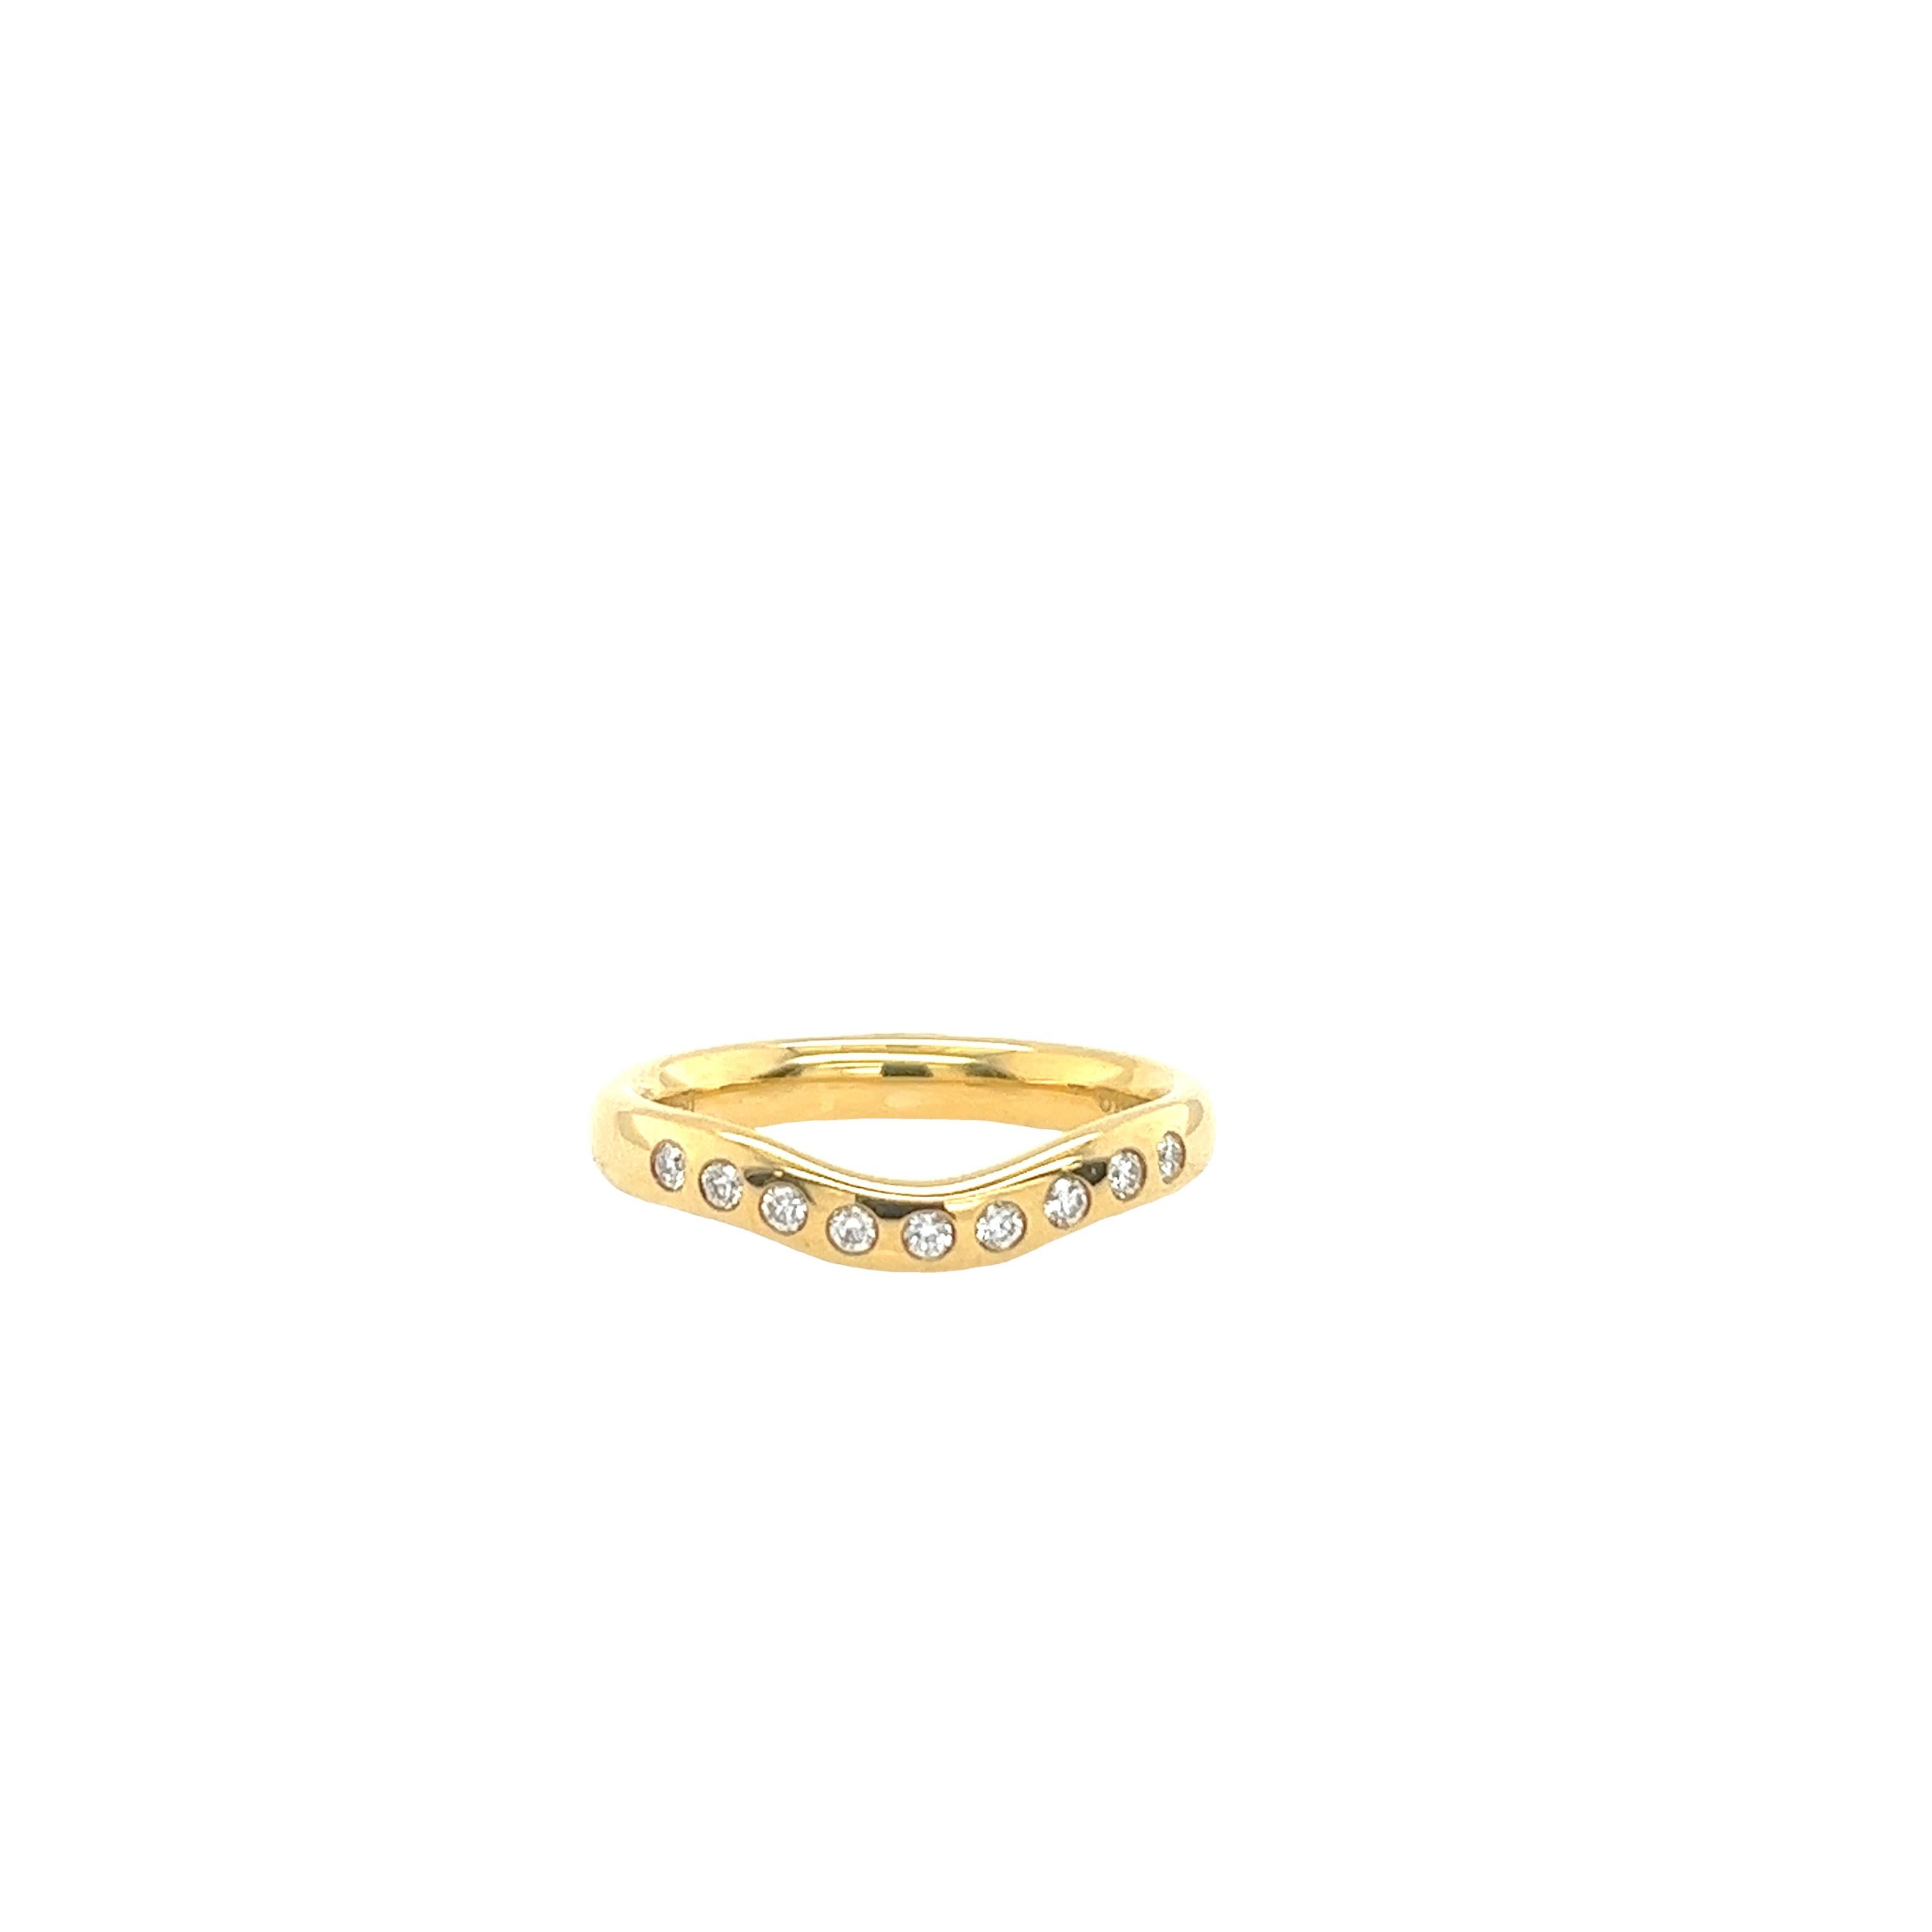 Round Cut Tiffany & Co. Elsa Peretti Wedding Band Set With 9 Diamonds in 18ct Yellow Gold For Sale